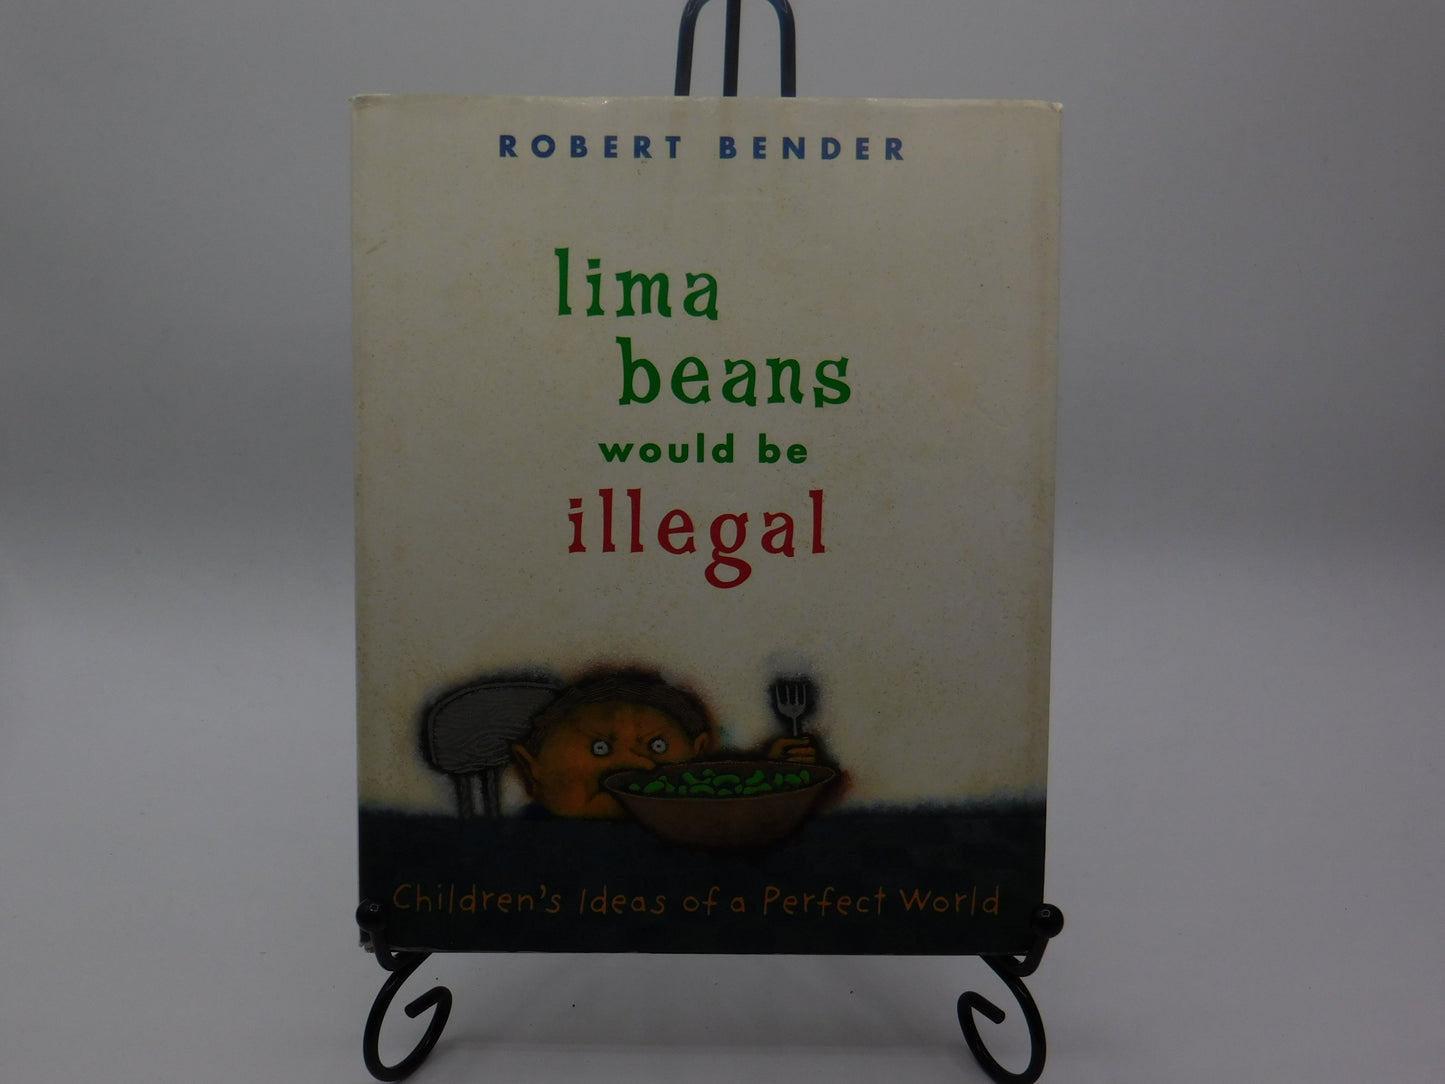 Lima beans would be illegal by Robert Bender